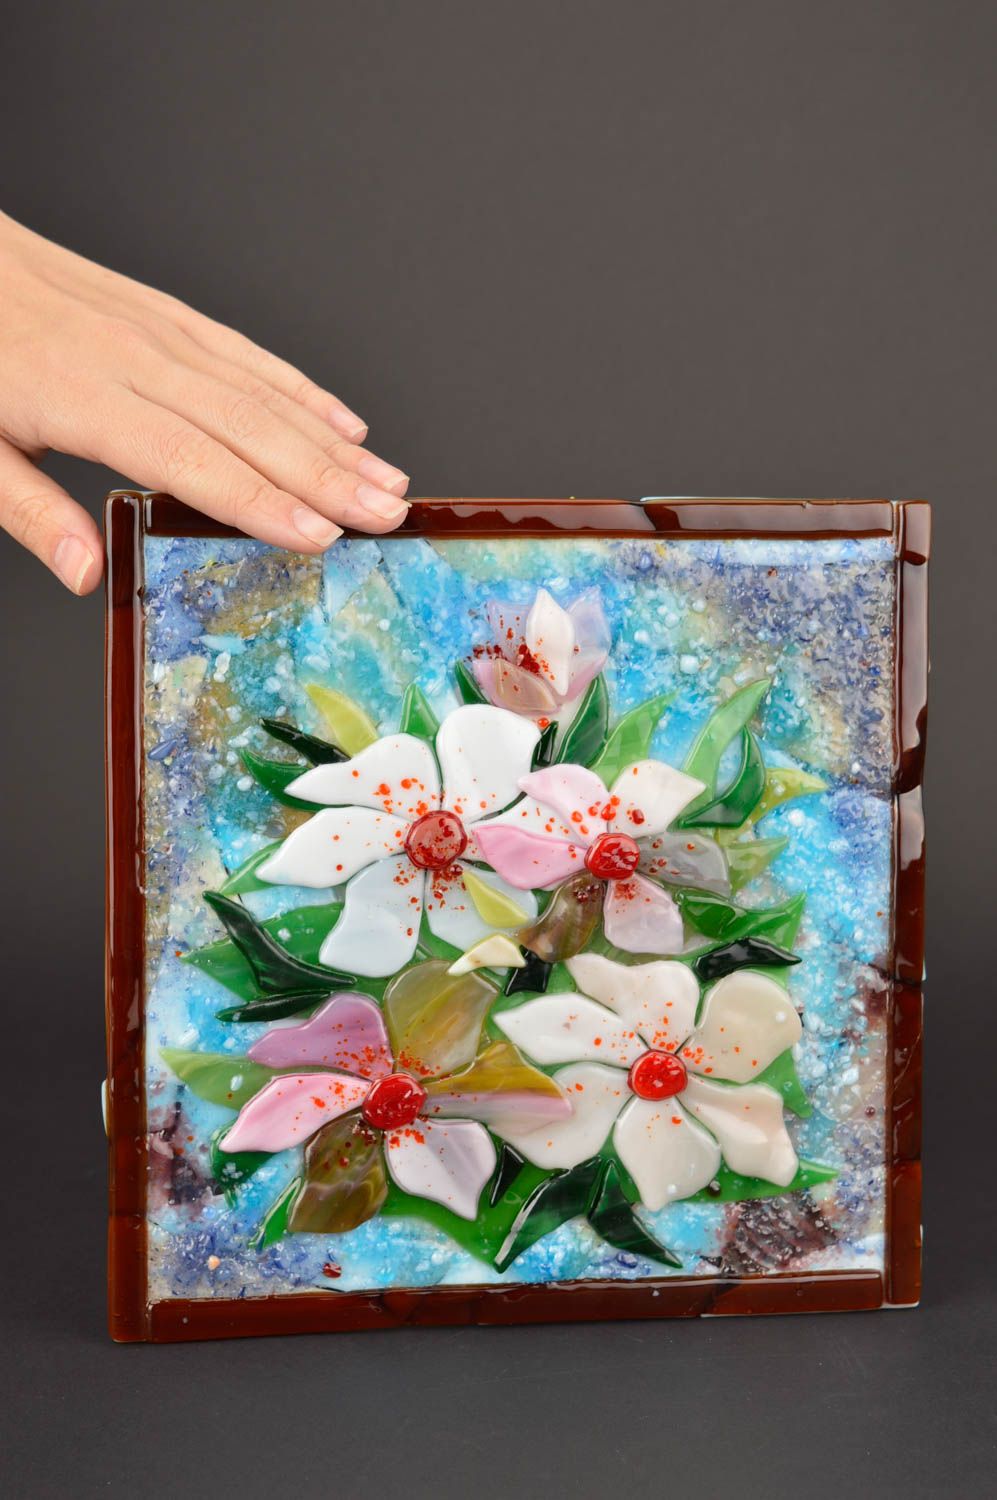 Handmade glass wall panel fusing ideas home decoration gift ideas for decor only photo 1